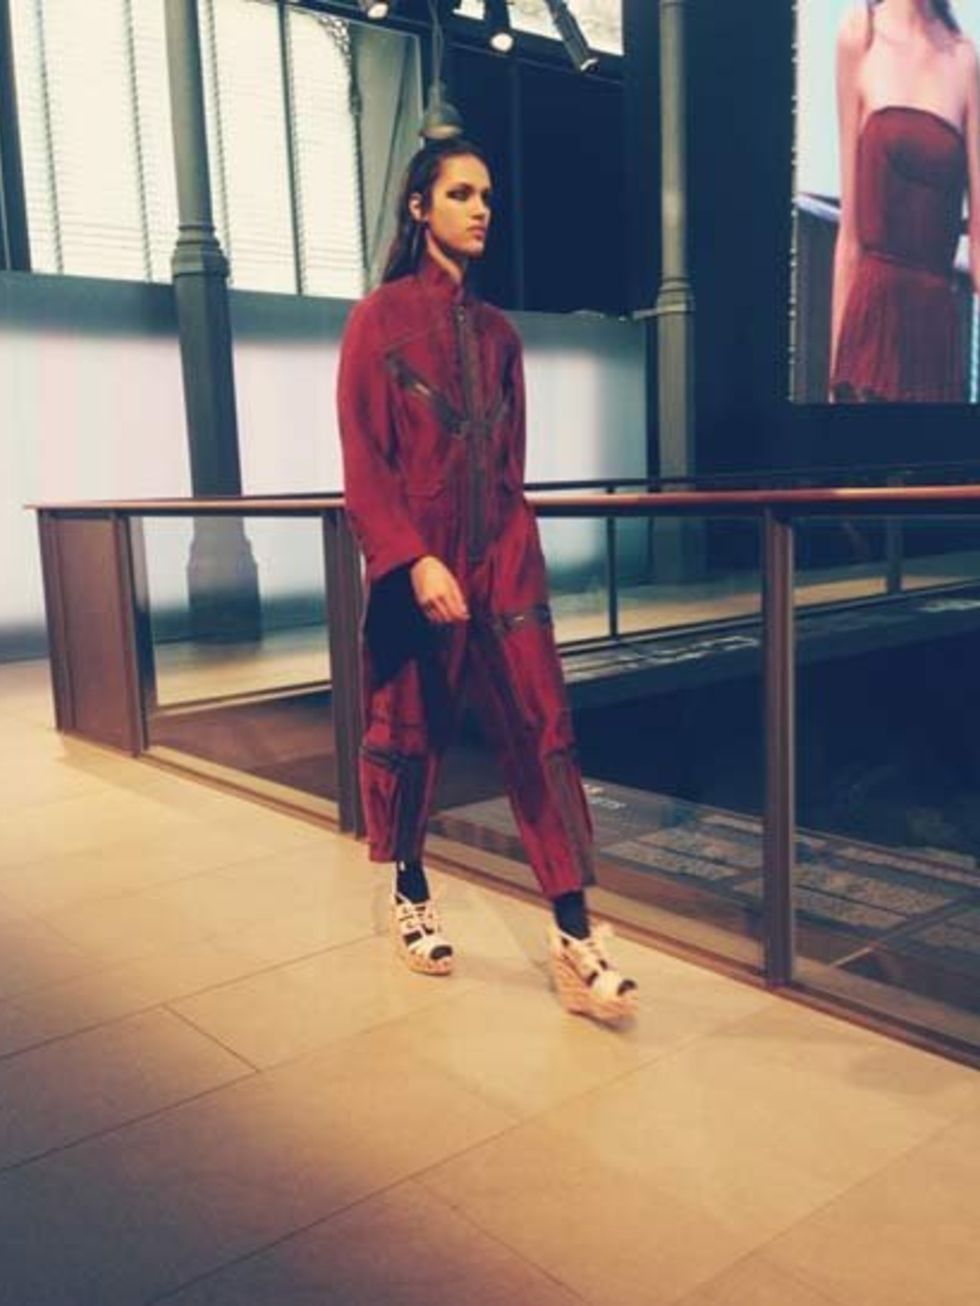 <p>Already an established designer, Isabel Toledo was one of the hottest tickets at Barcelona Fashion Week. Her beautiful evening gowns and theatrical silhouettes have gained her a cult following across Europe, but there is more to her collection than jus